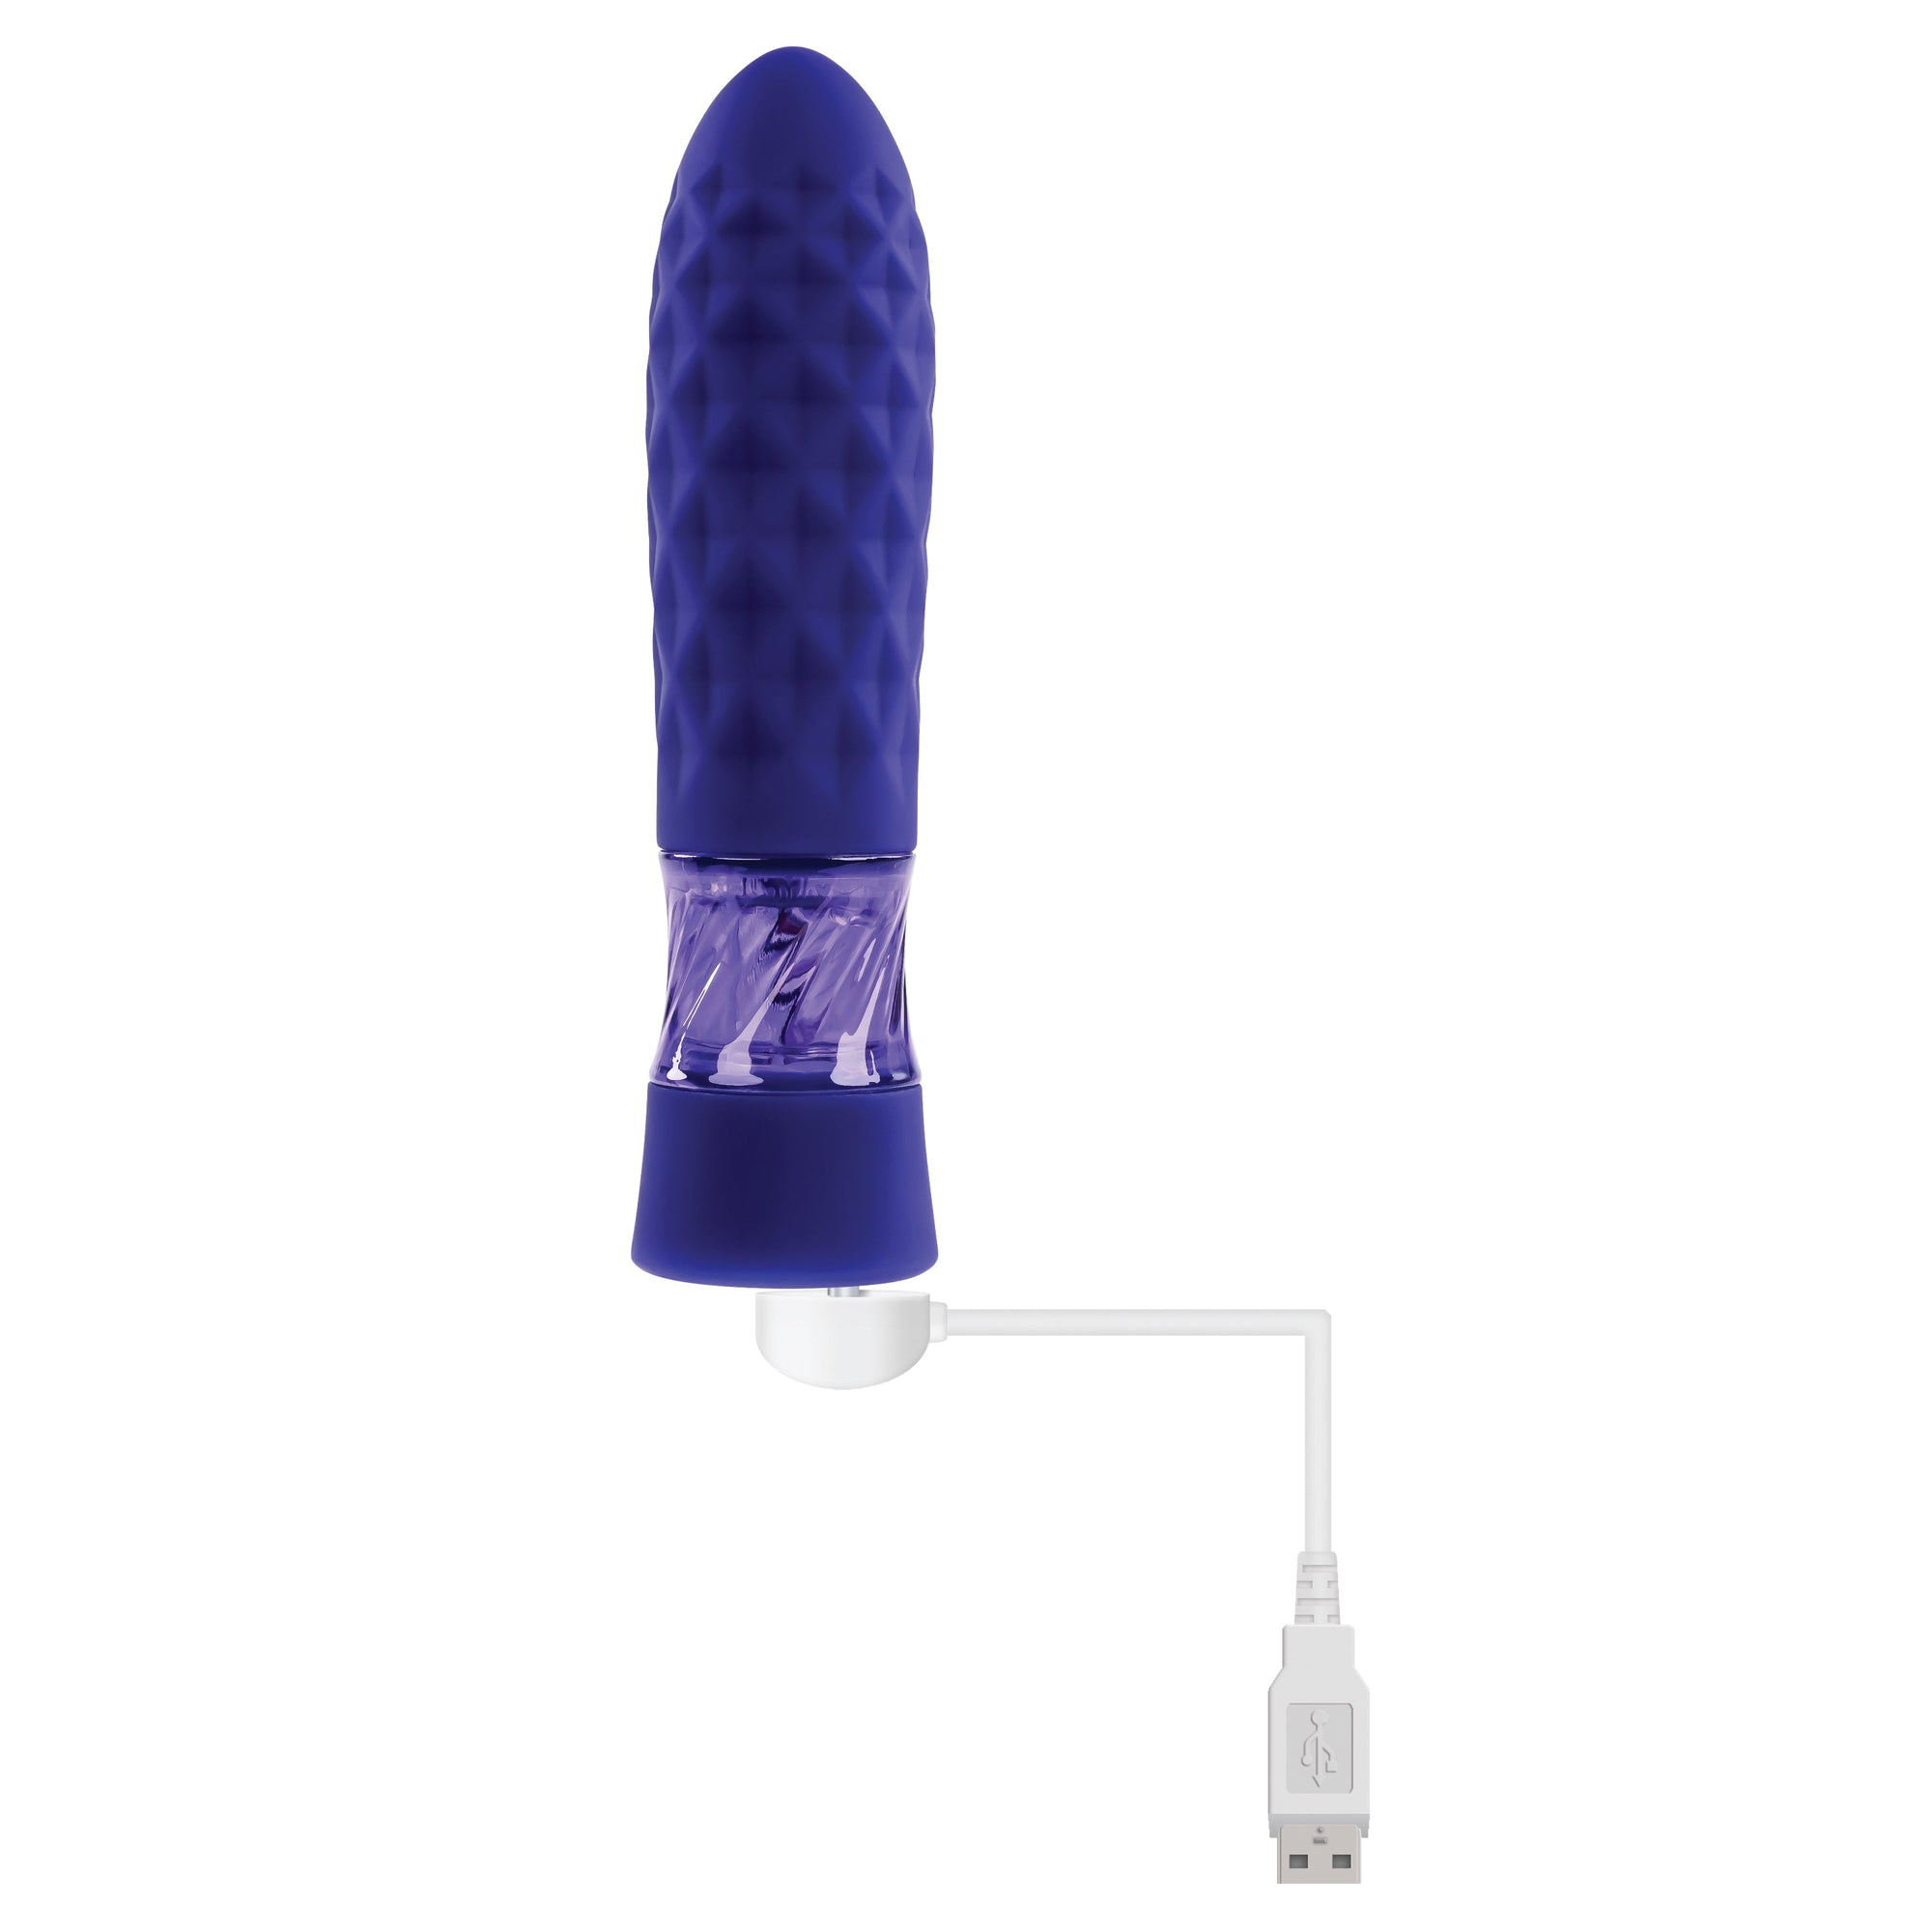 Evolved - Raver Silicone Rechargeable Bullet Vibrator (Blue)